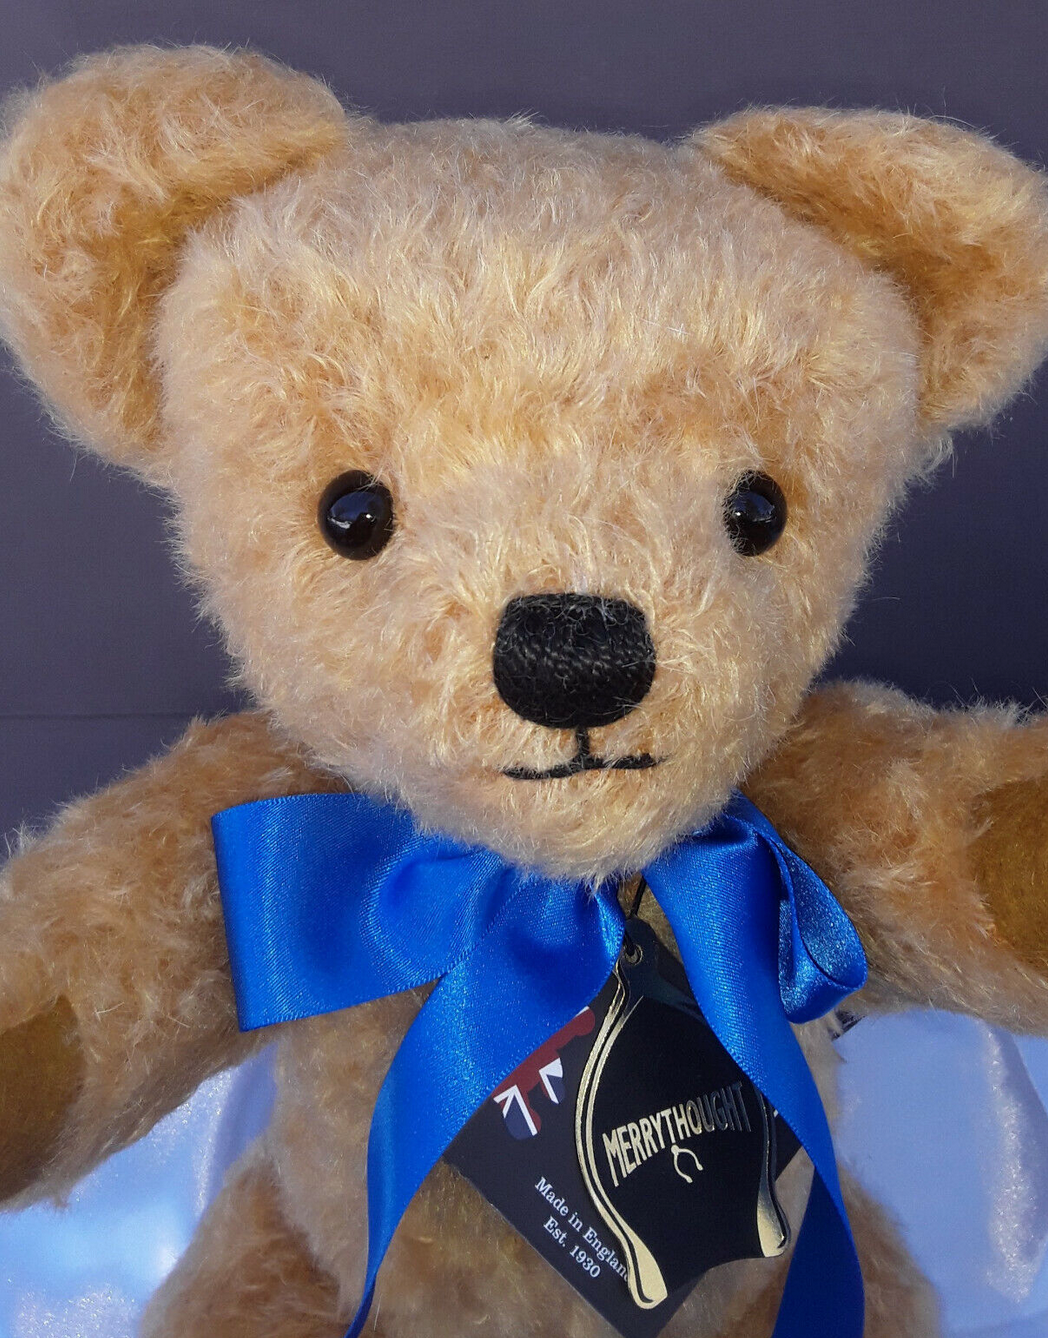 London Curly Gold - 16" Teddy Bear with Growler by Merrythought